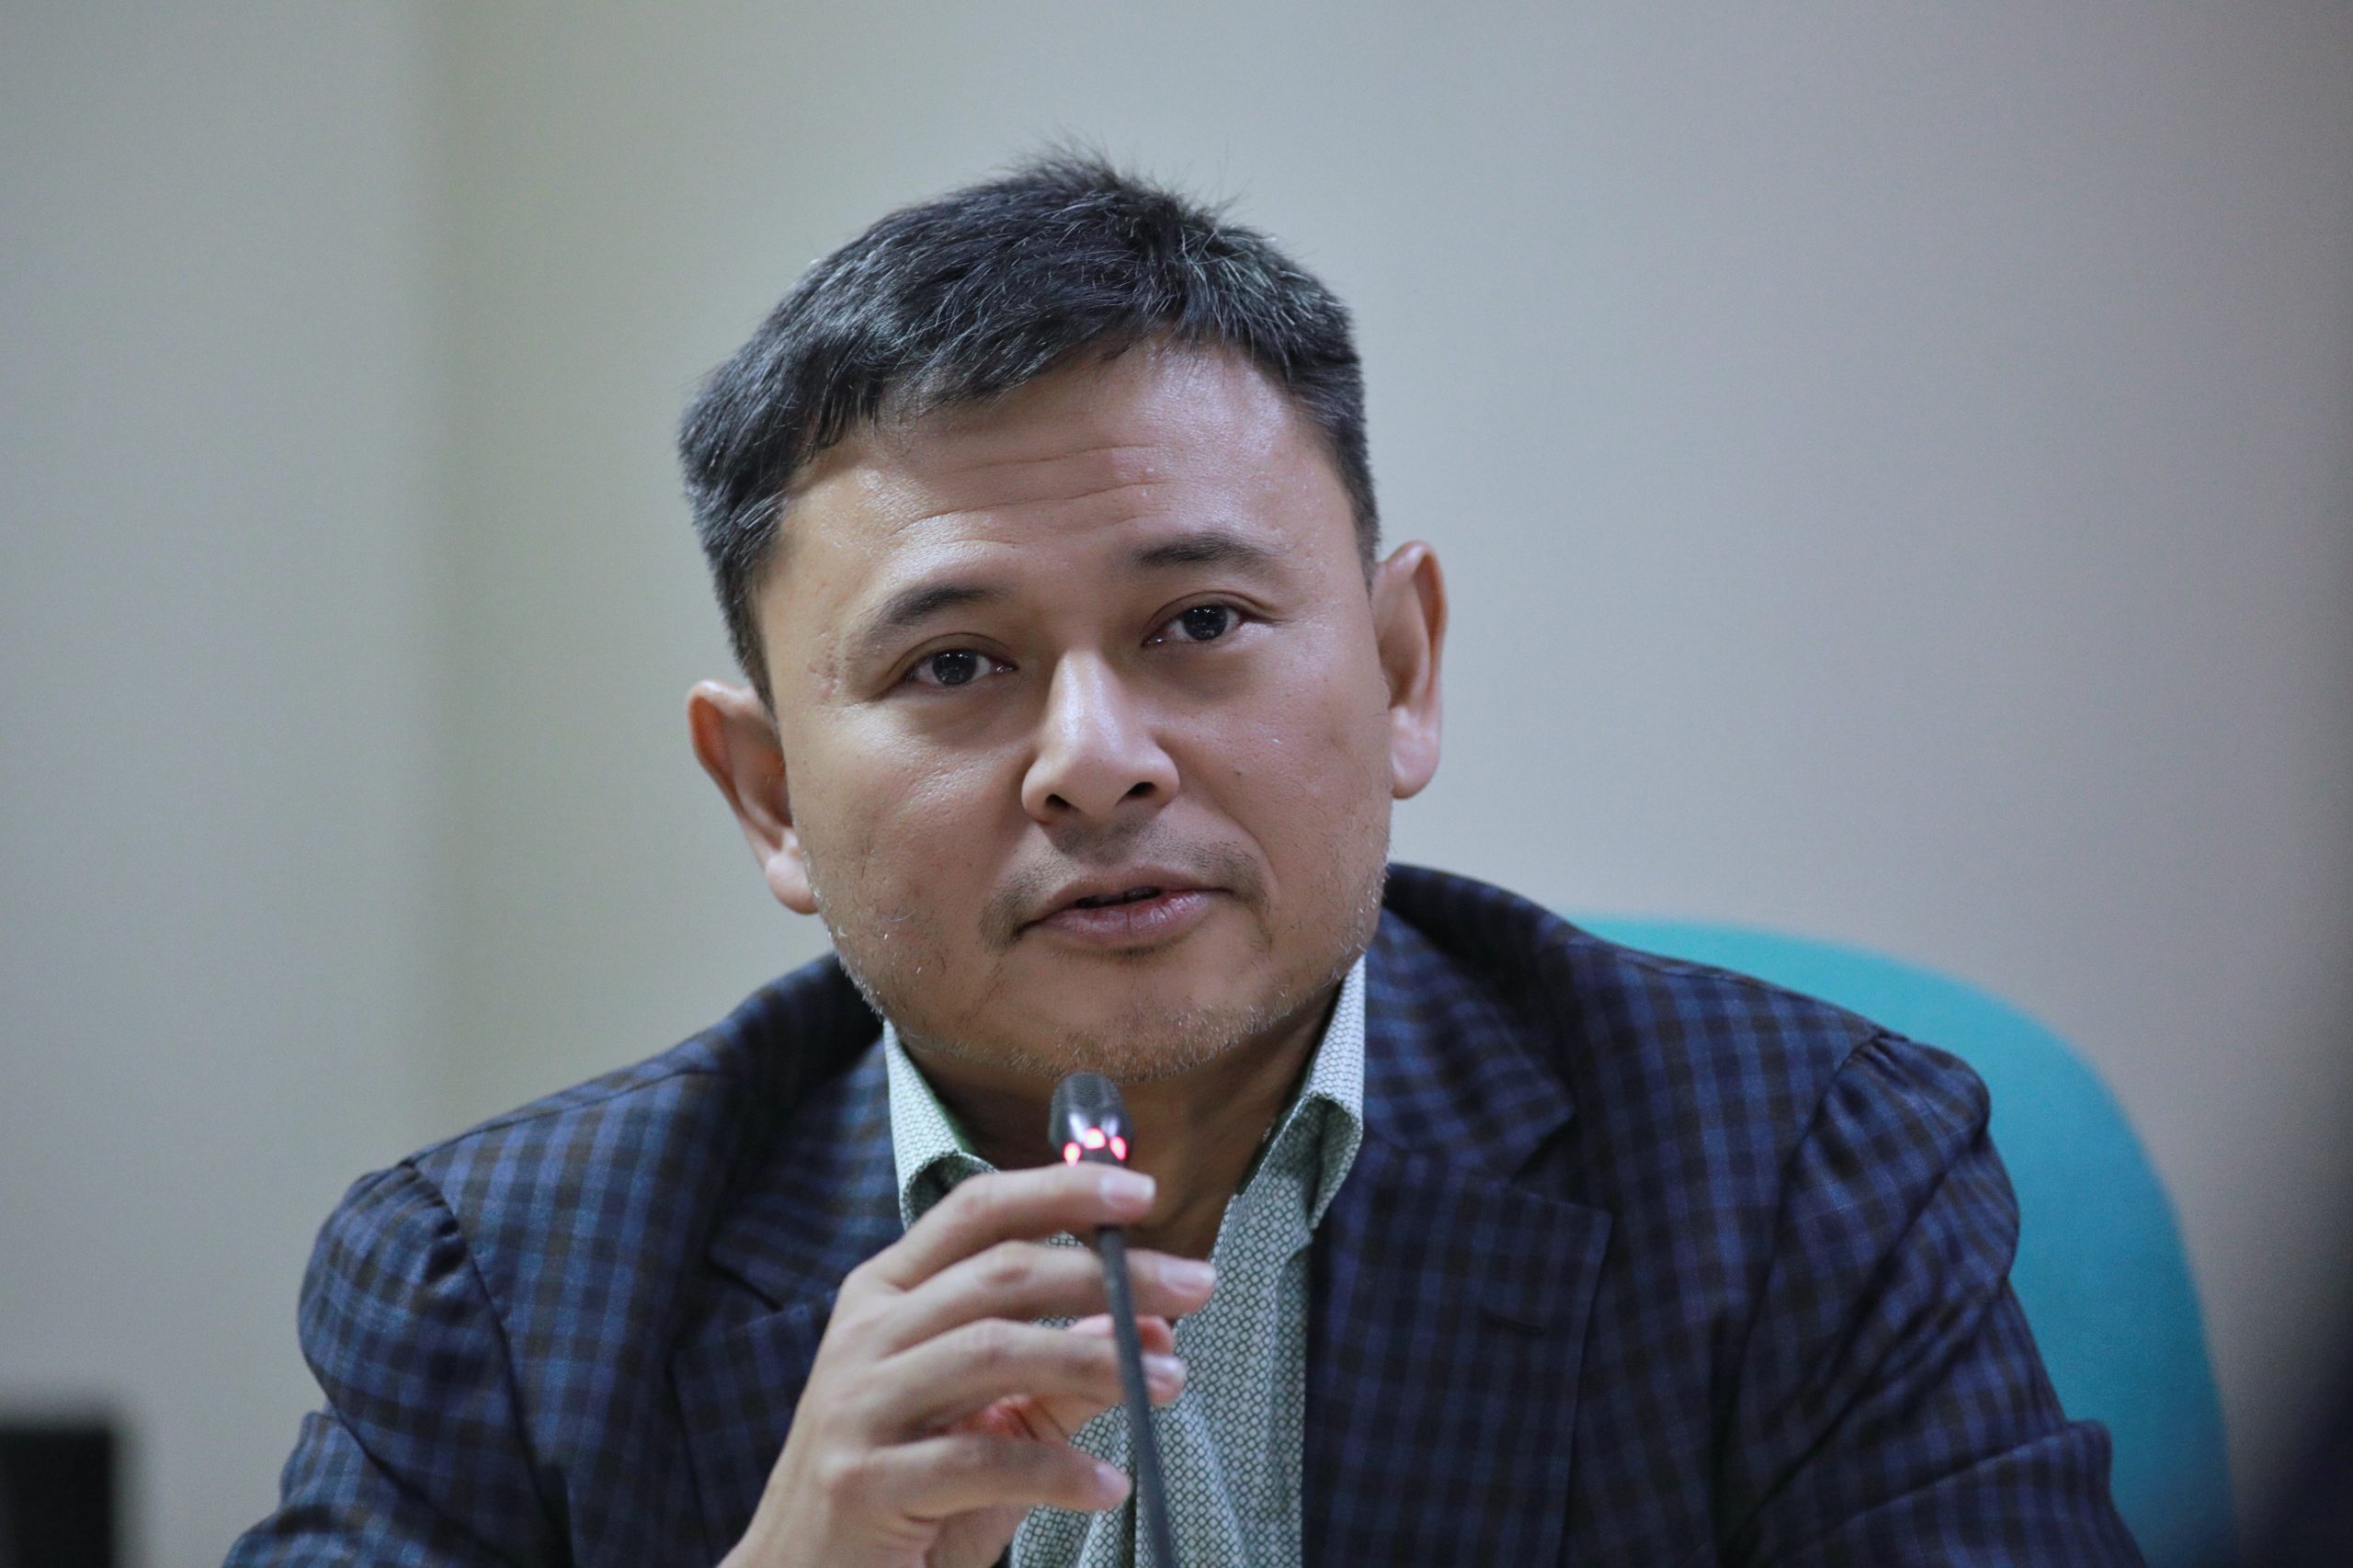 The Senate may approve next week its version of the proposed P5.3-trillion national spending program, according to the chair of the chamber’s finance committee.